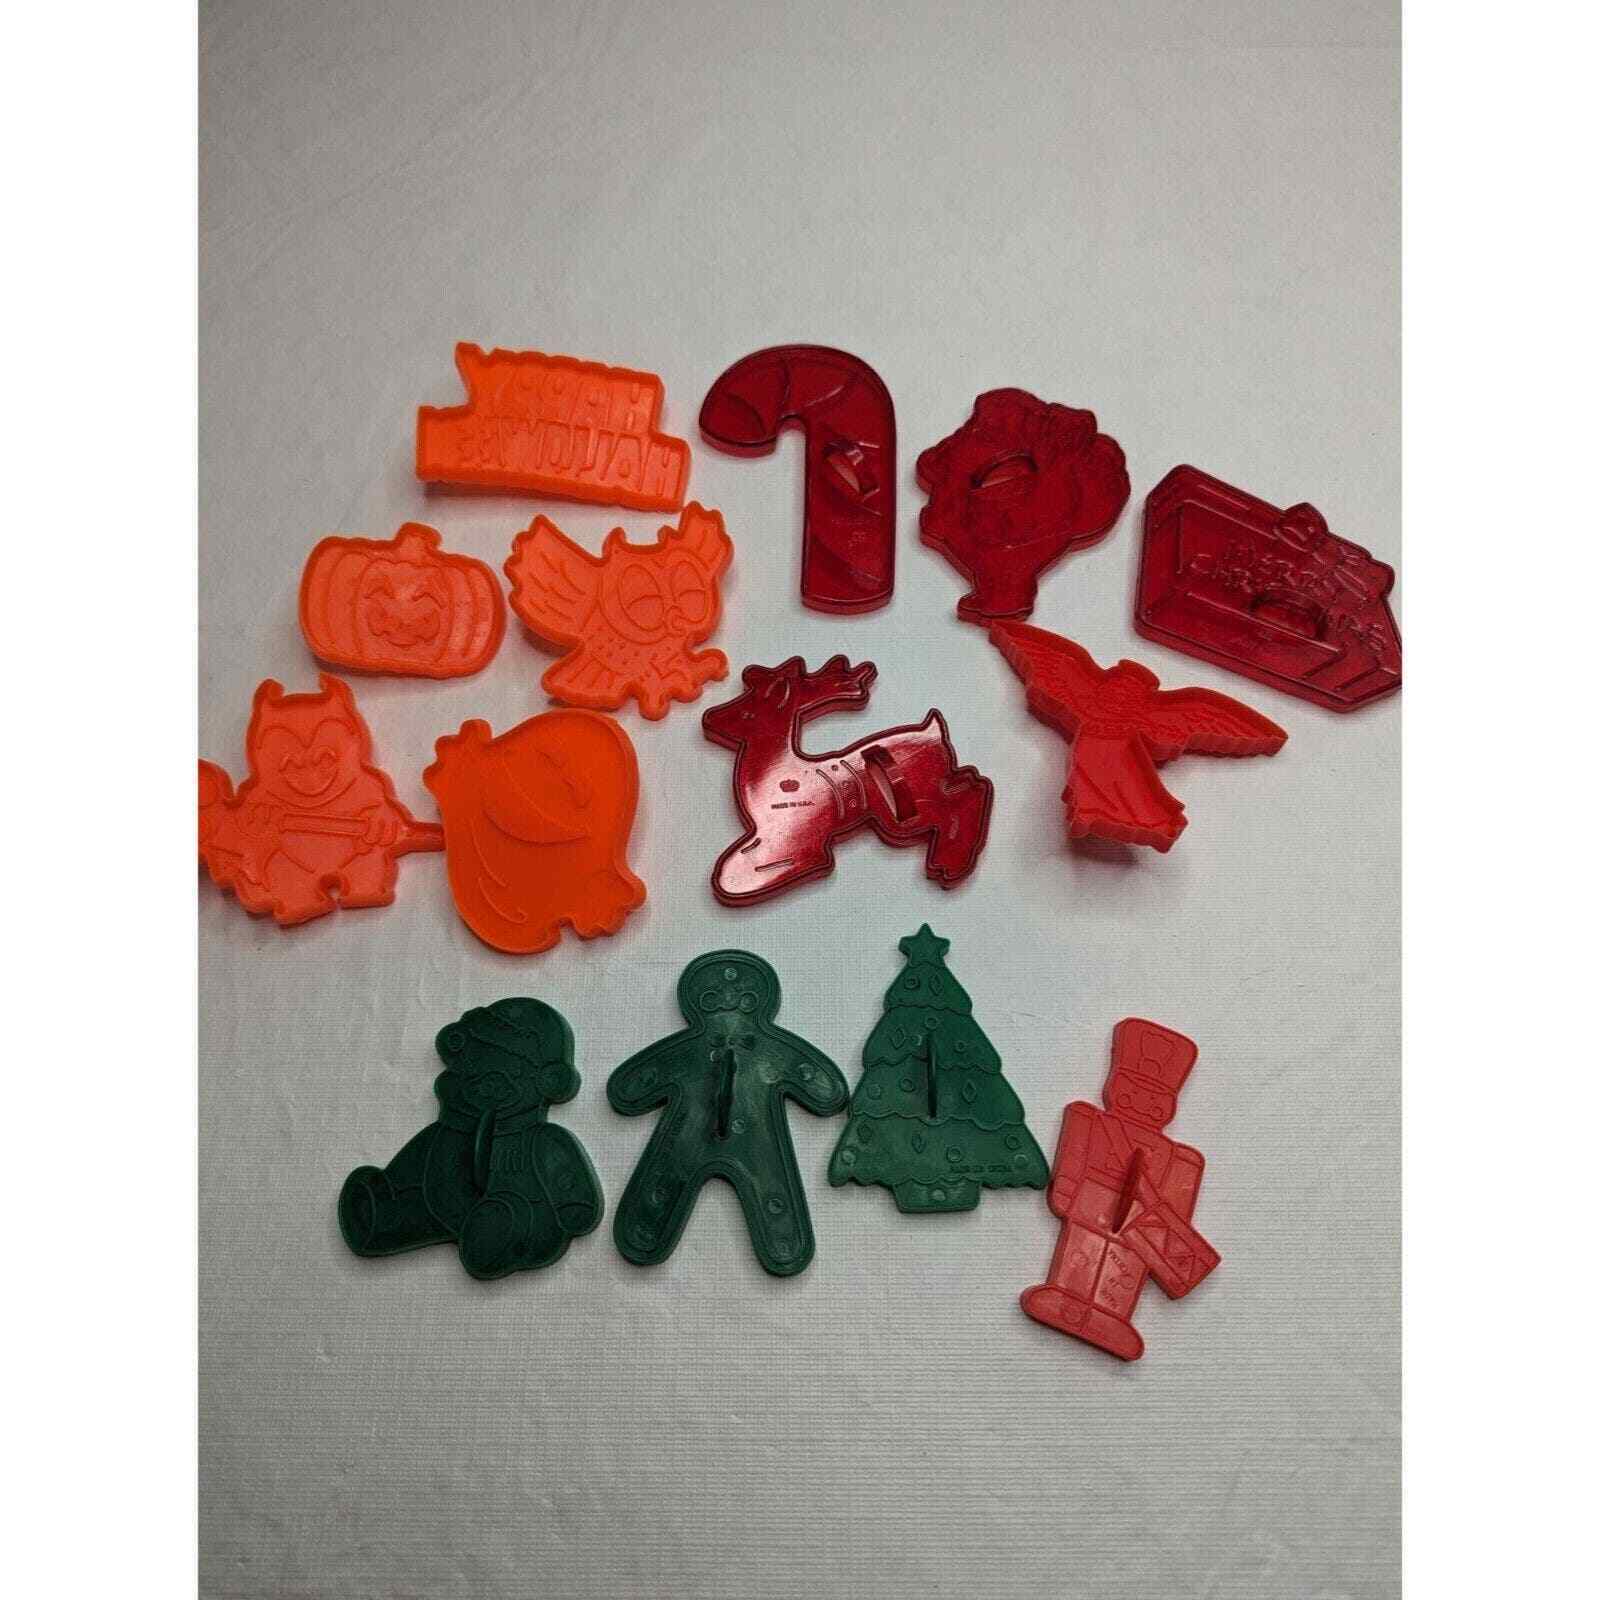 Lot of 14 Vintage Plastic Cookie Cutters Halloween and Christmas